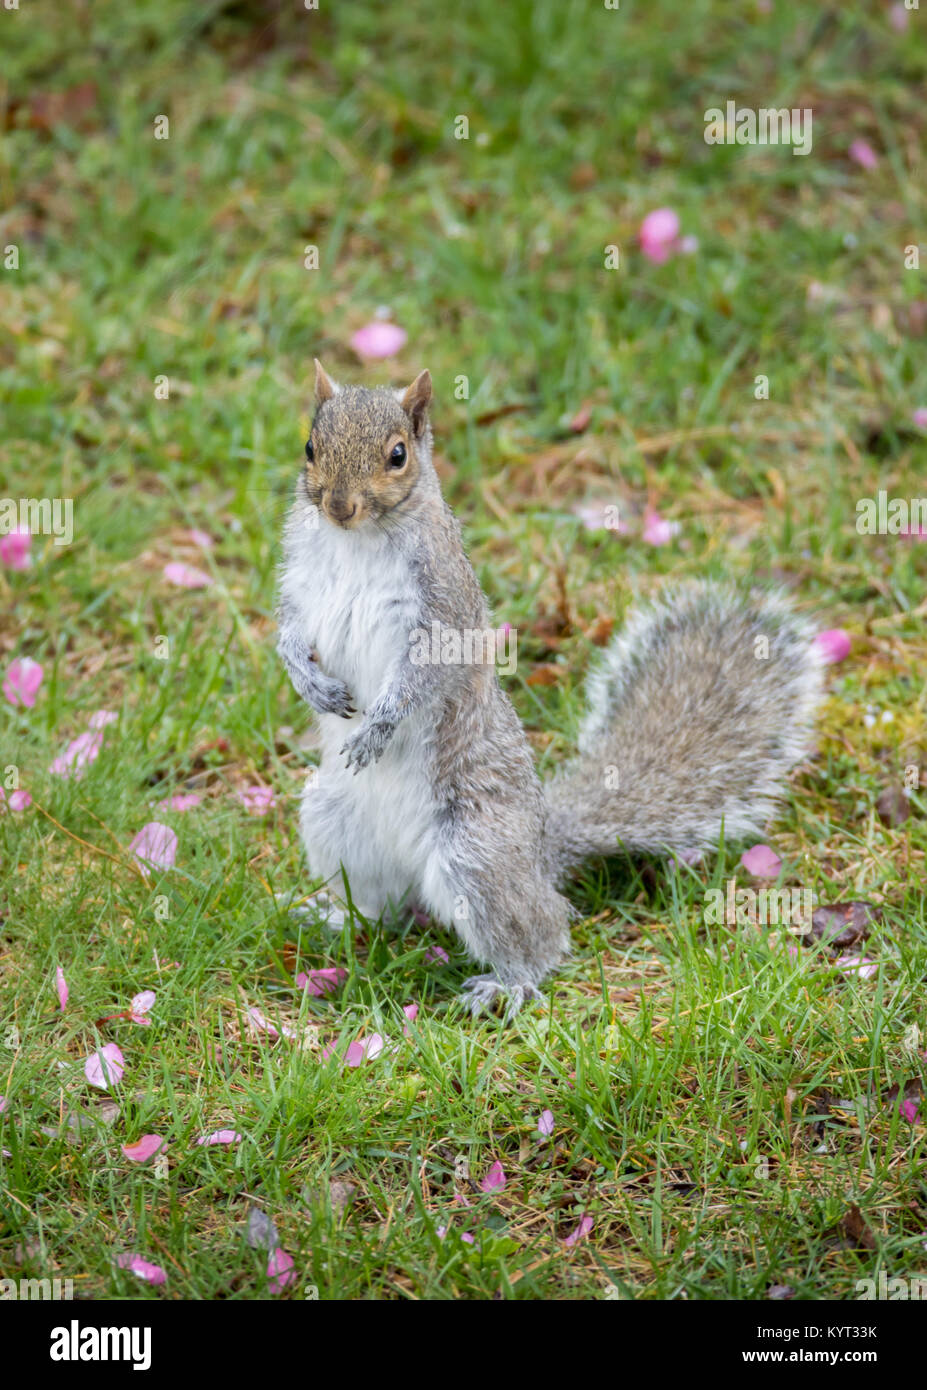 Gray Squirrel sitting with hands together and green background Stock Photo